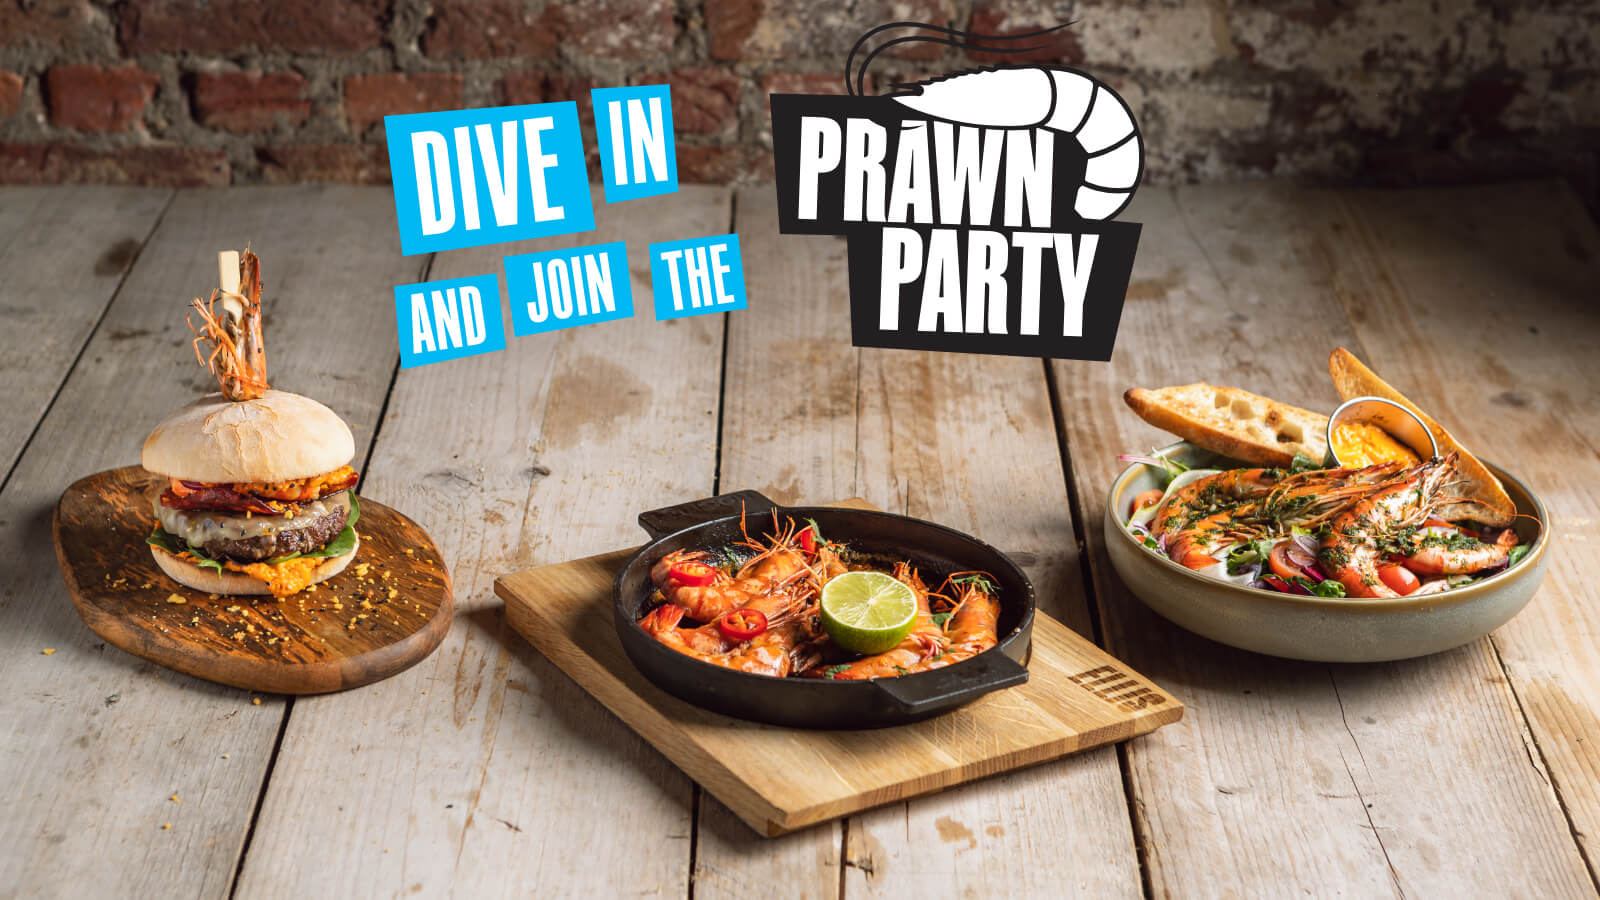 DIVE IN AND JOIN THE ELLIS PRAWN PARTY!